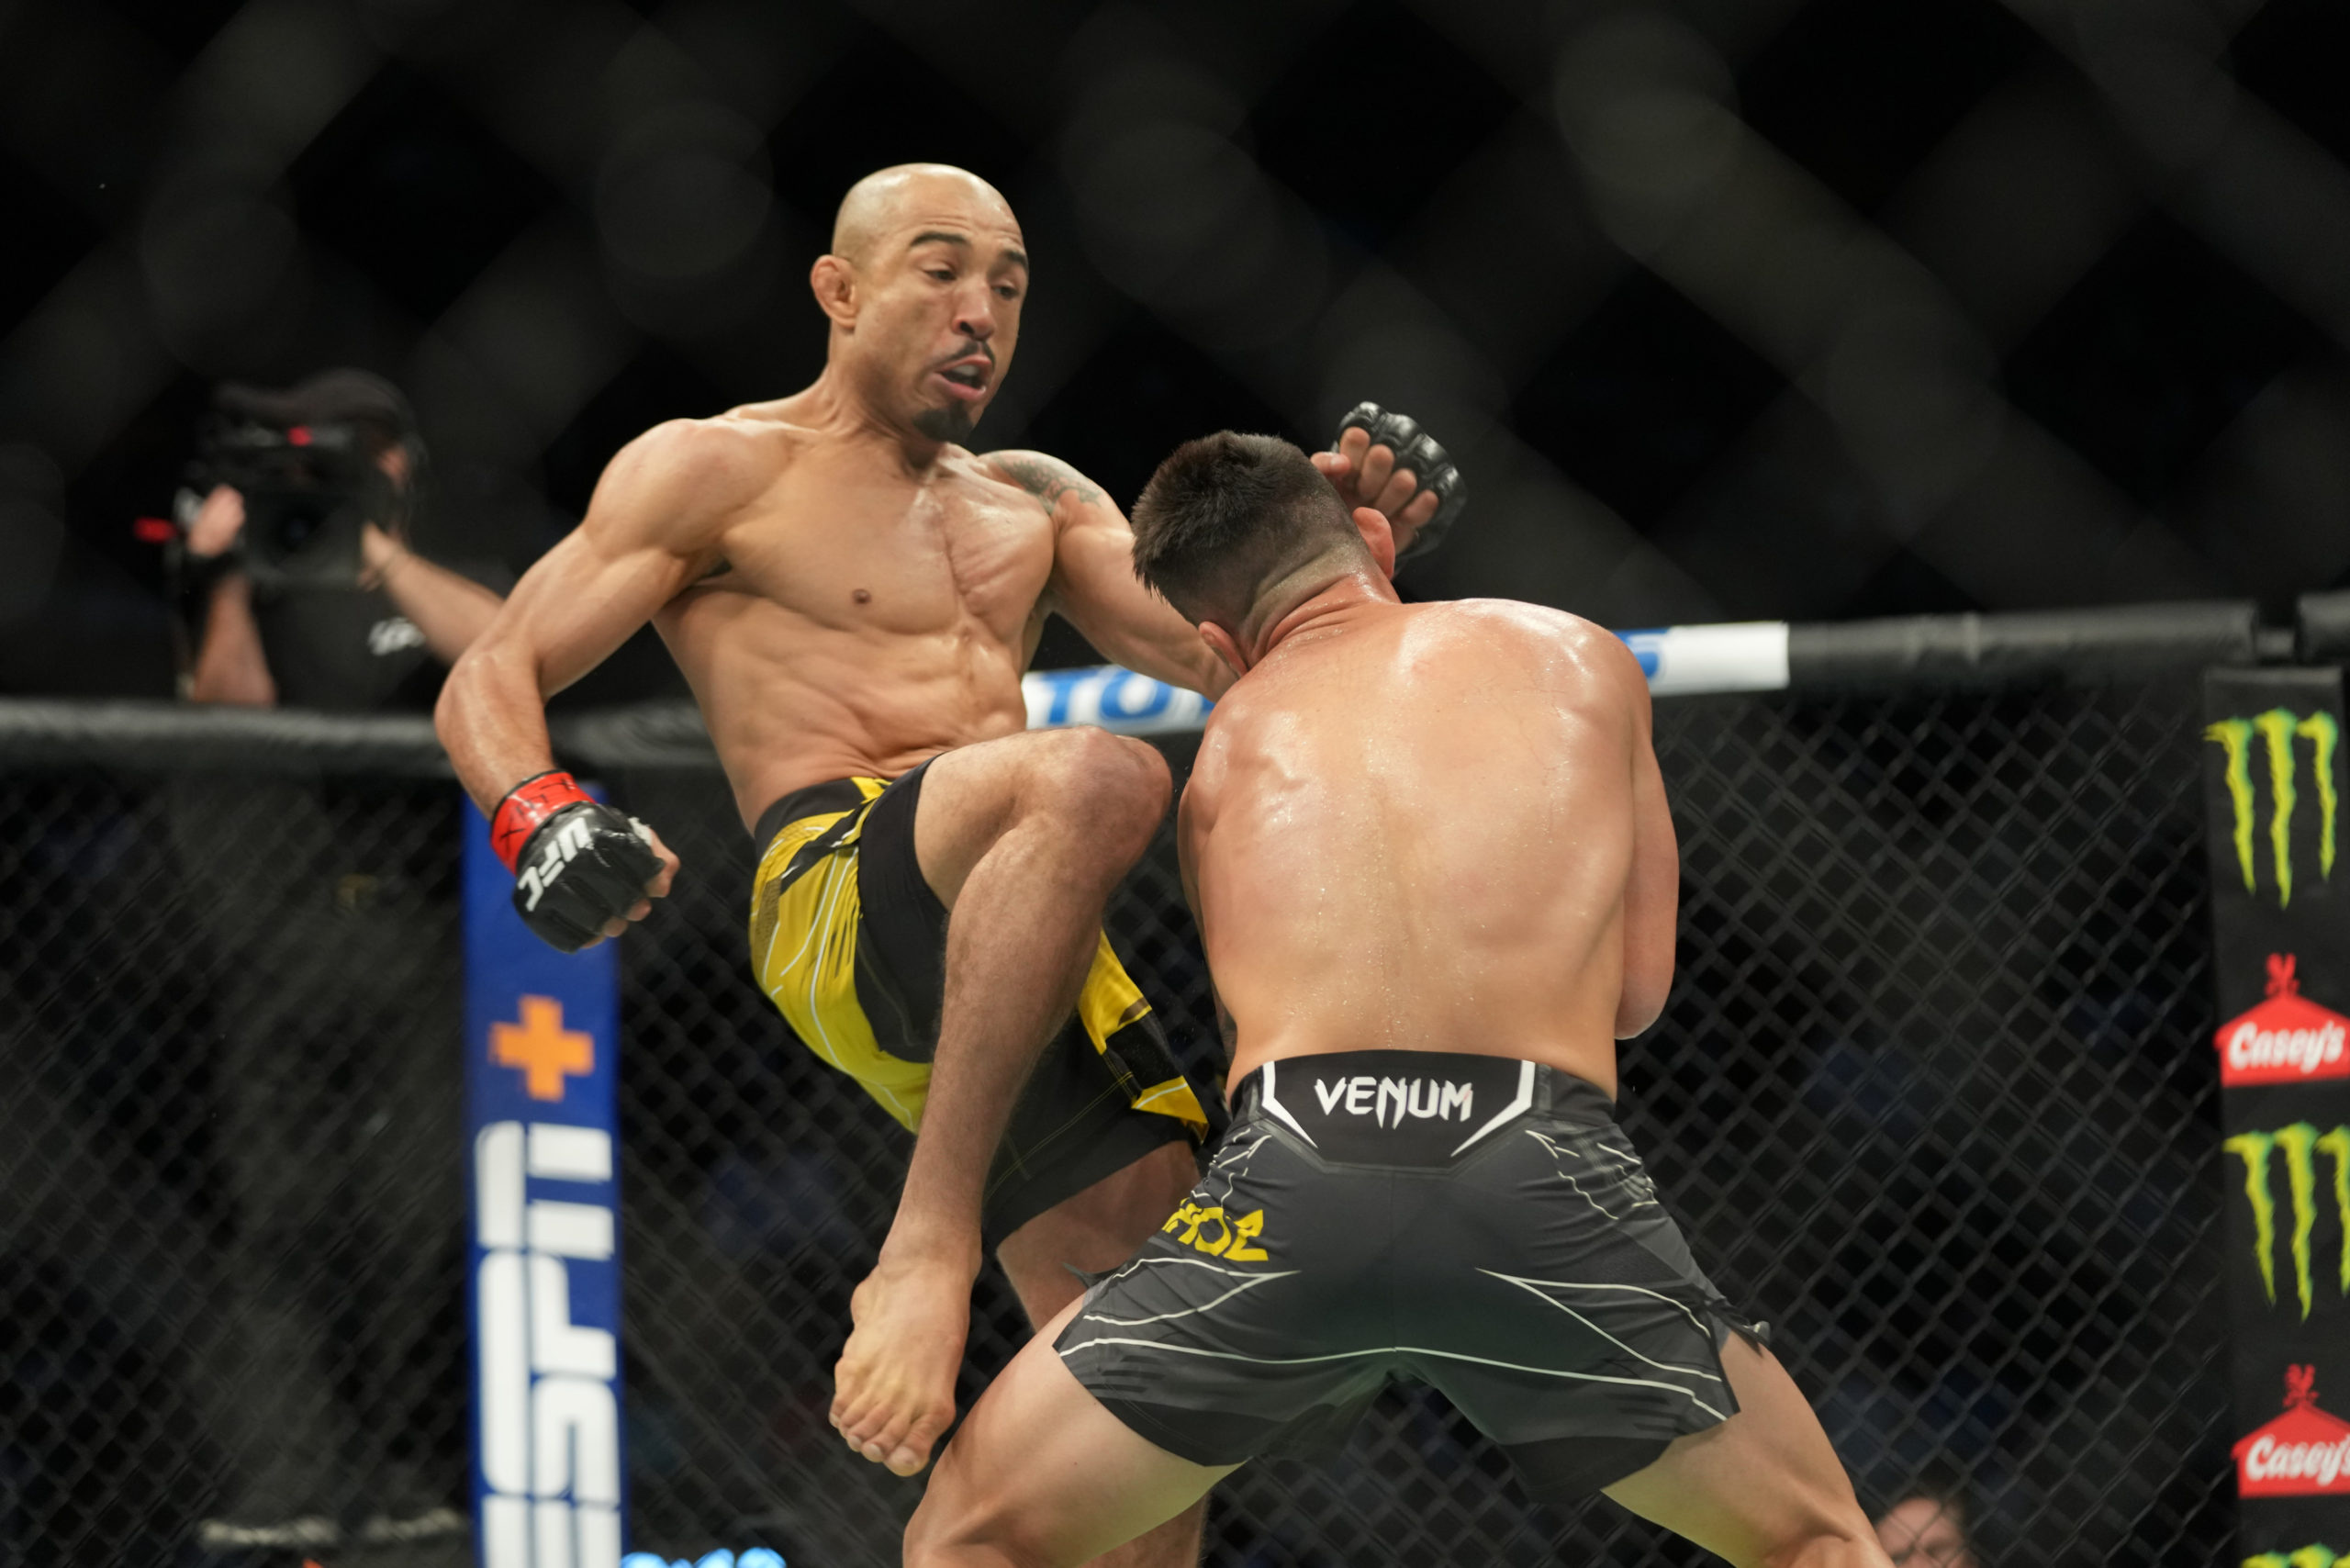 Mixed Martial Arts: Jose Aldo, The greatest featherweight in mixed martial arts history. 2560x1710 HD Wallpaper.